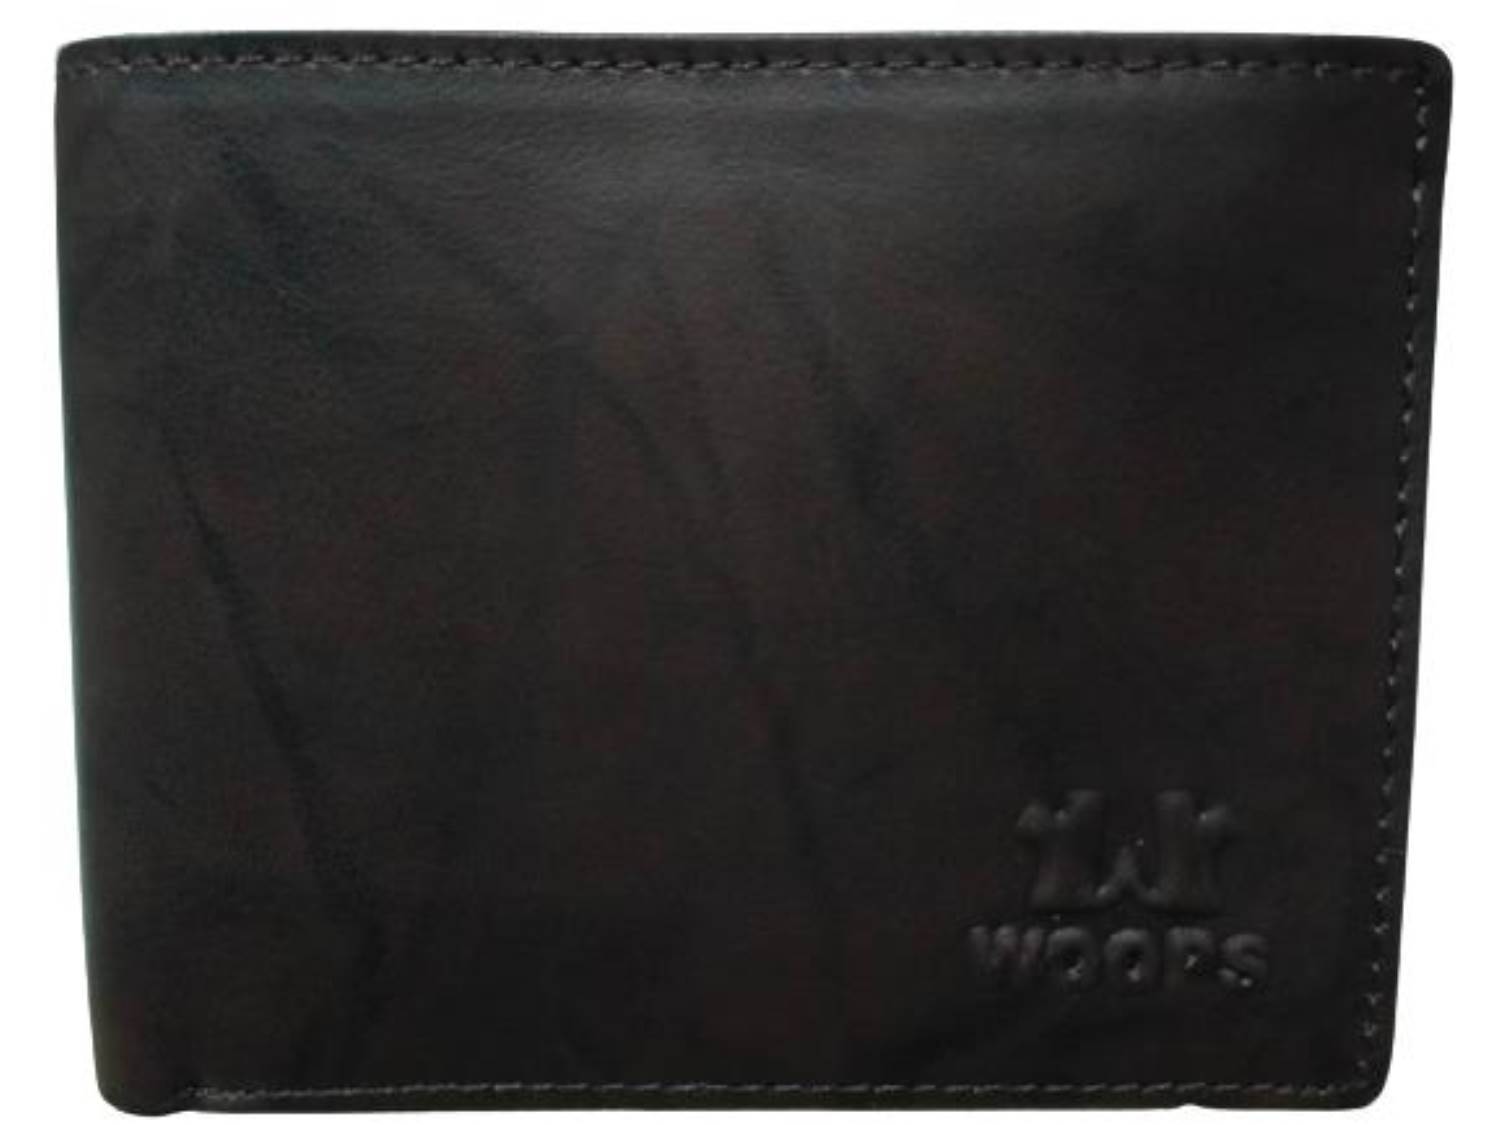 Buy LEDERBUCK Stylish RFID Protected Genuine Leather Wallet for Men |  External Card Slot | 4 Card Slots | Coin Pocket |2 Currency Slots (Tan) at  Amazon.in